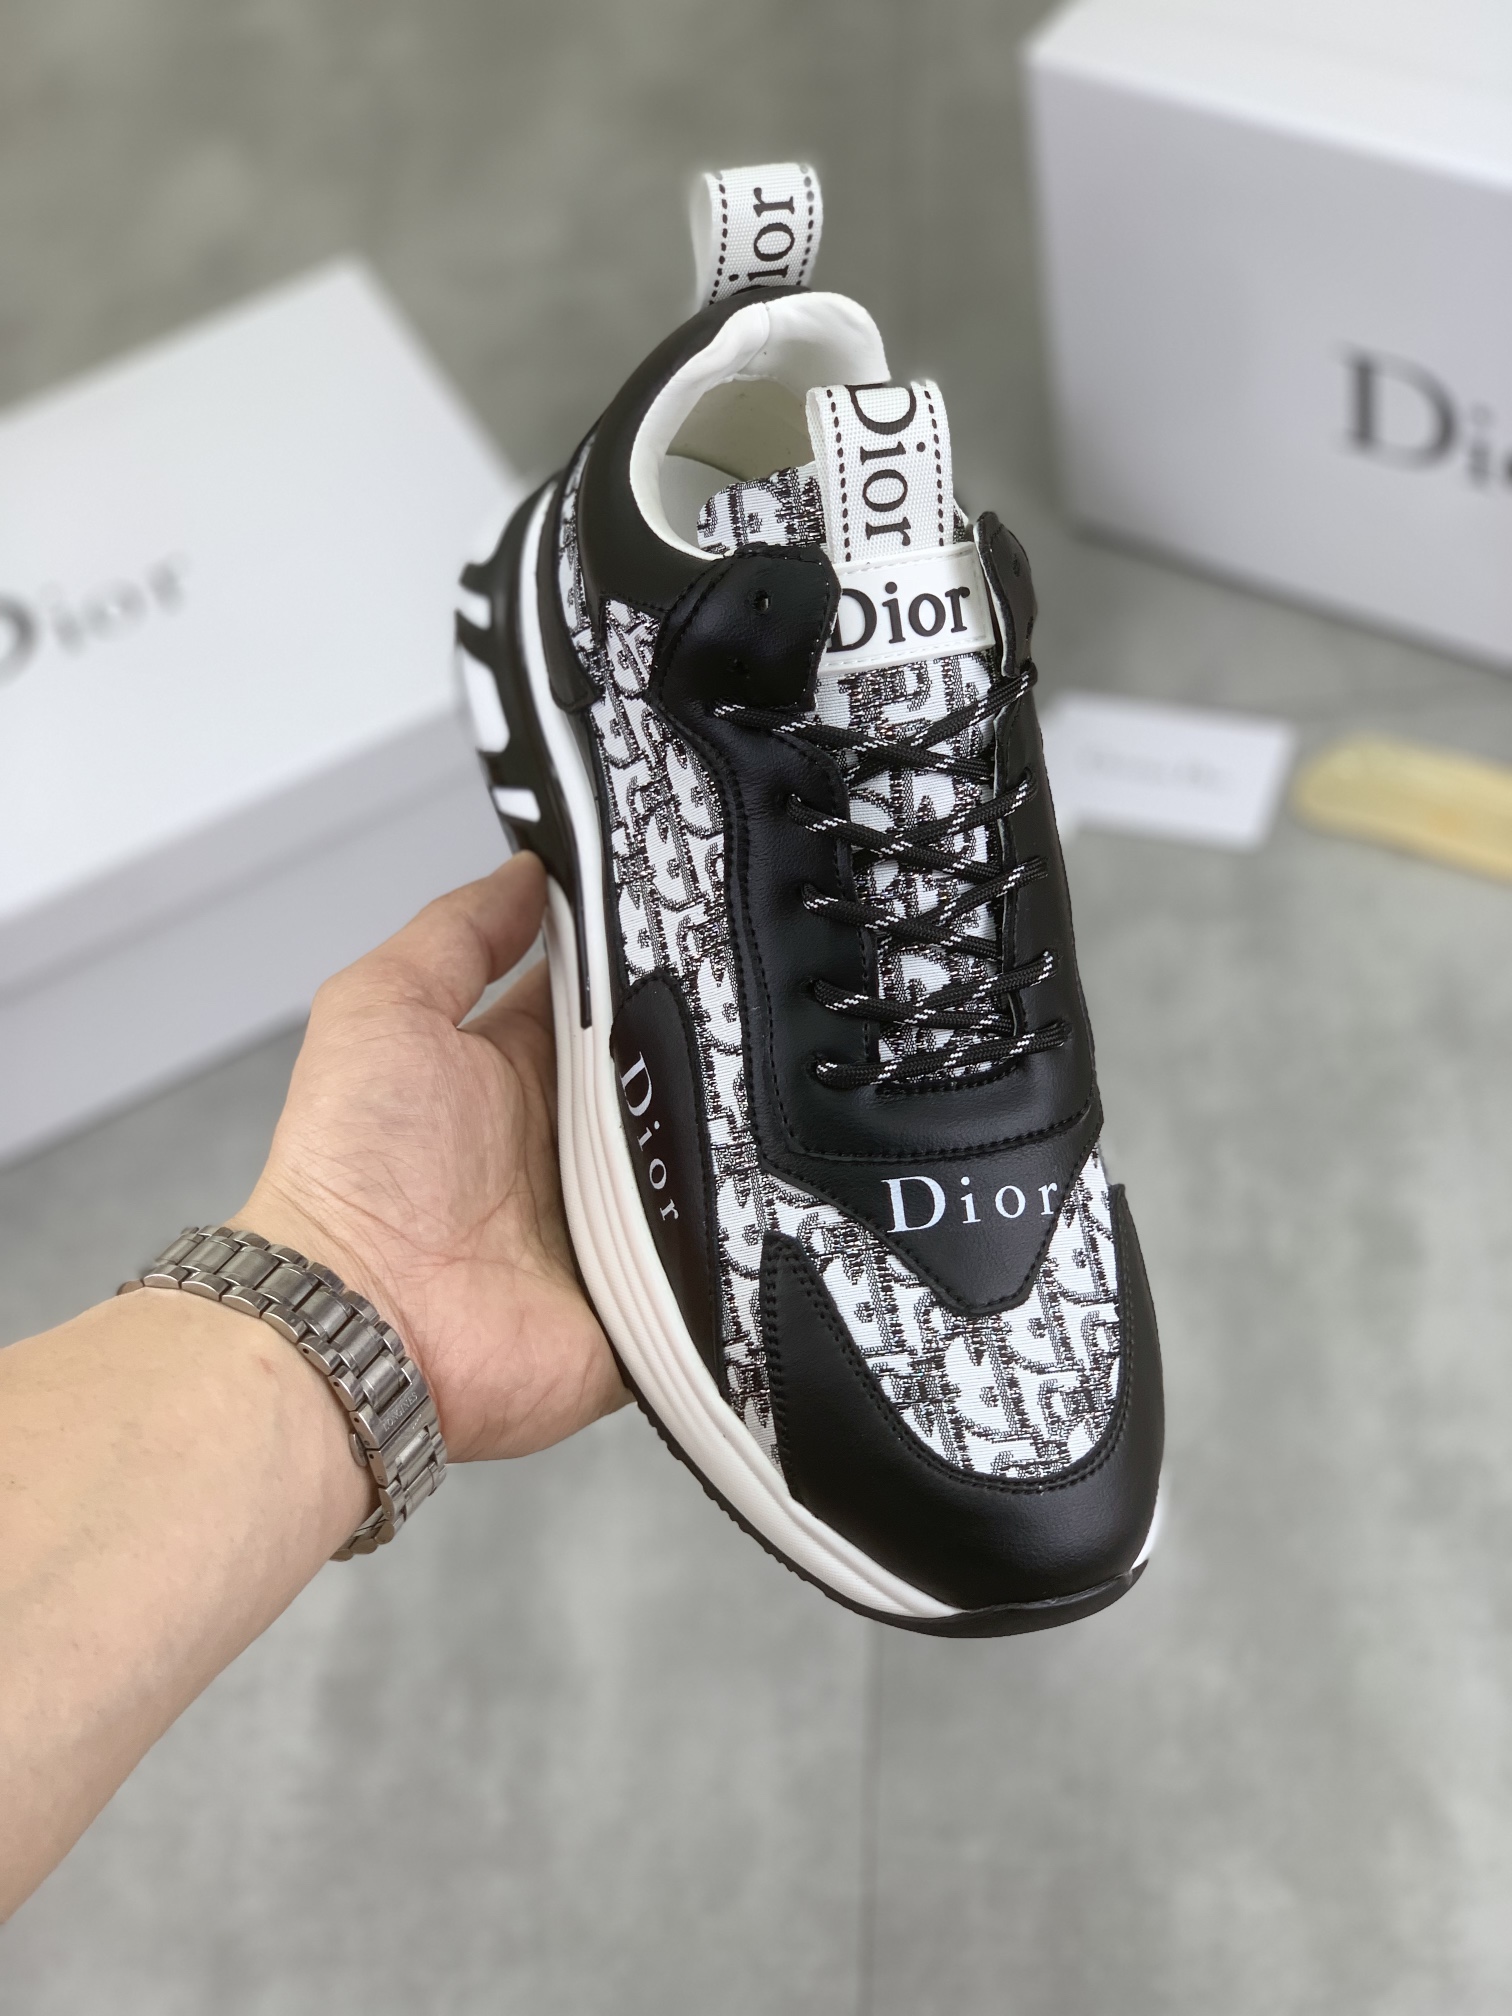 The Top Ultimate Knockoff
 Dior Casual Shoes quality Fake
 Black White Cowhide Pig Skin Fashion Casual